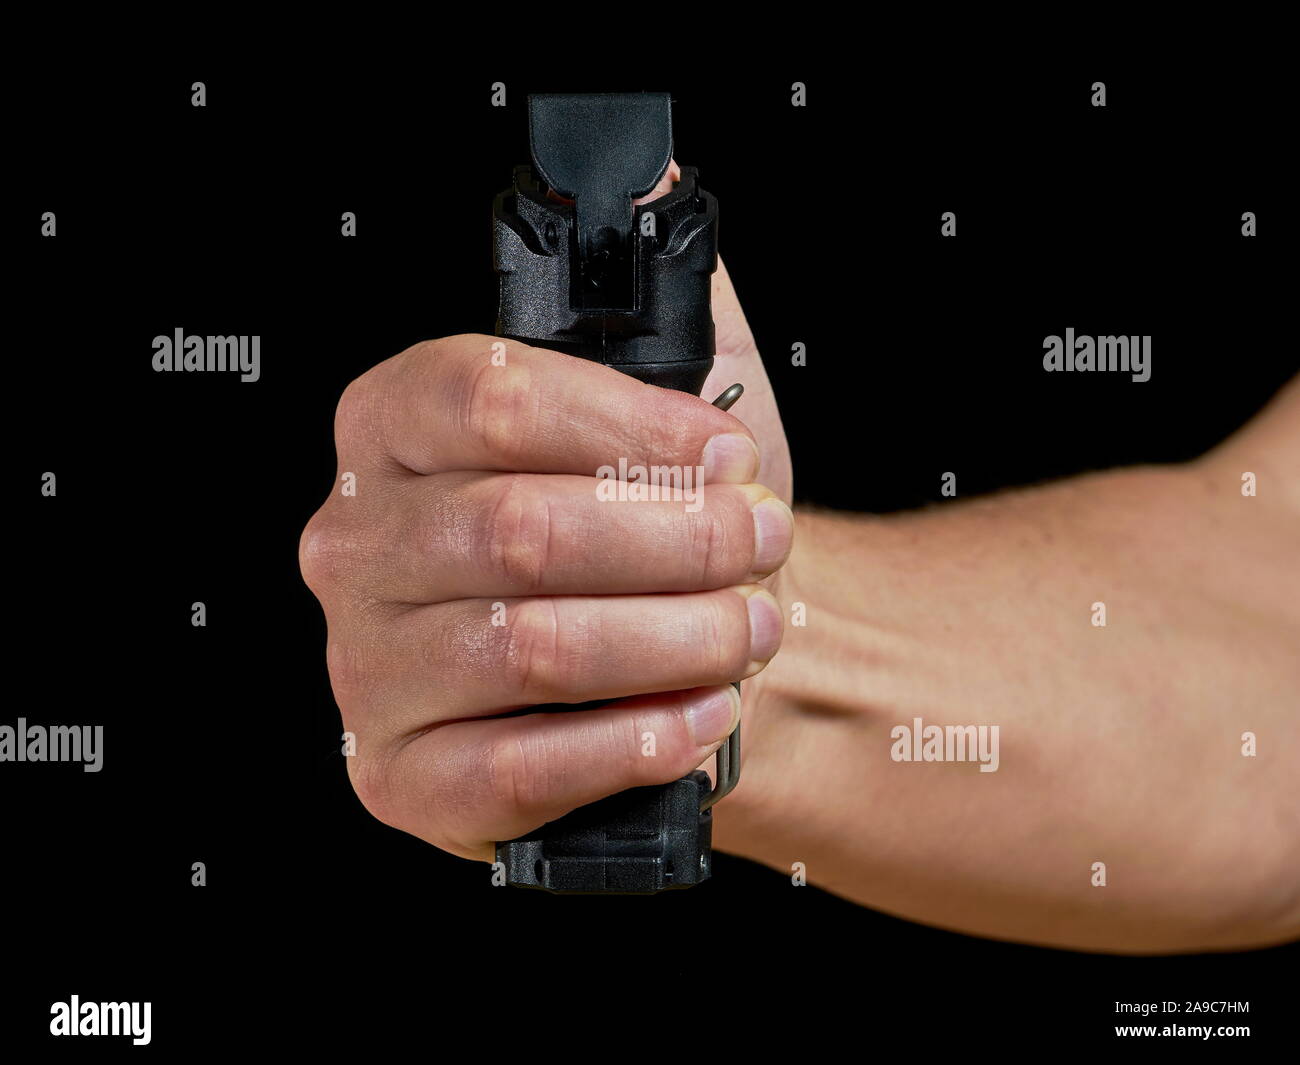 male aiming pepper spray towards camera on black background Stock Photo